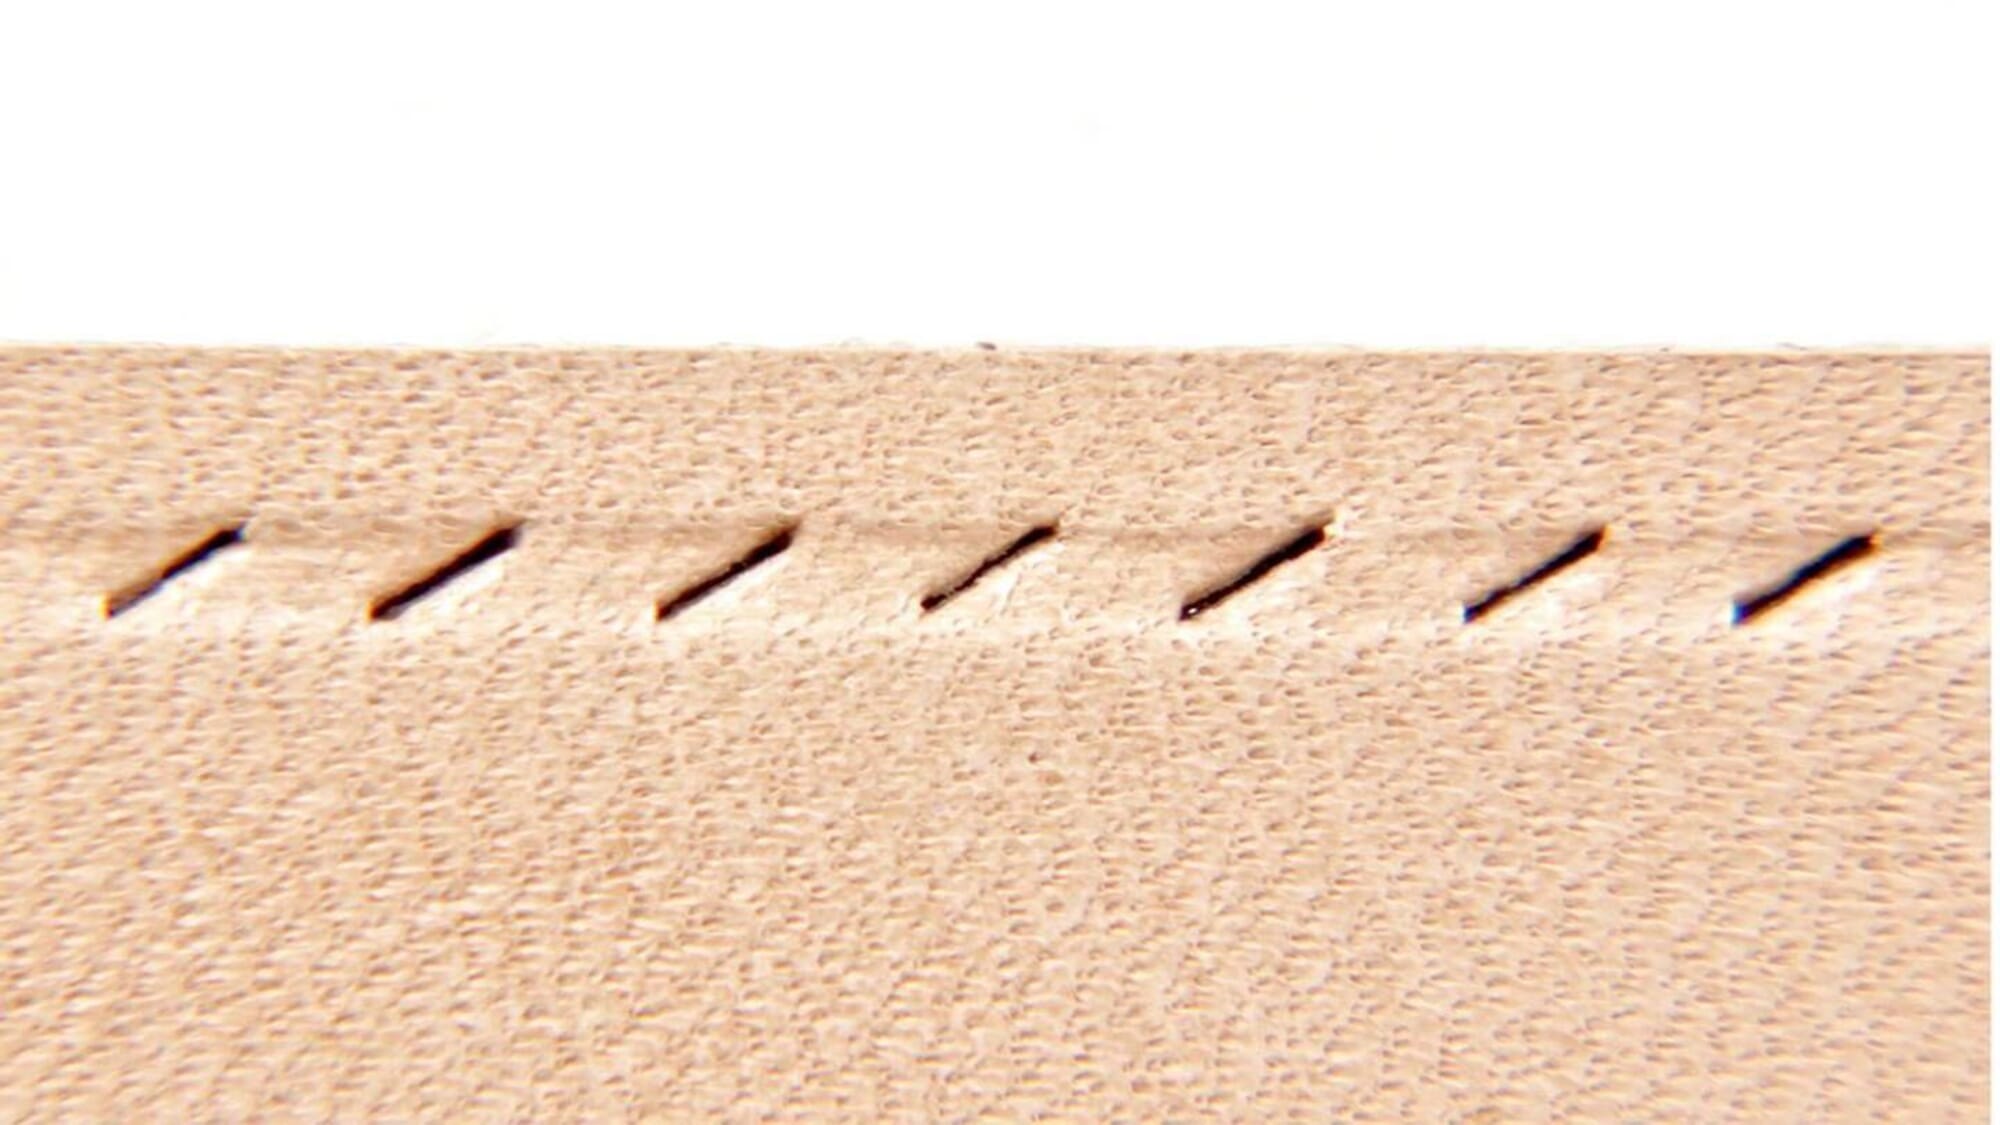 Decorative Edge Lacings  Leather working, Diy leather projects, Stitching  leather